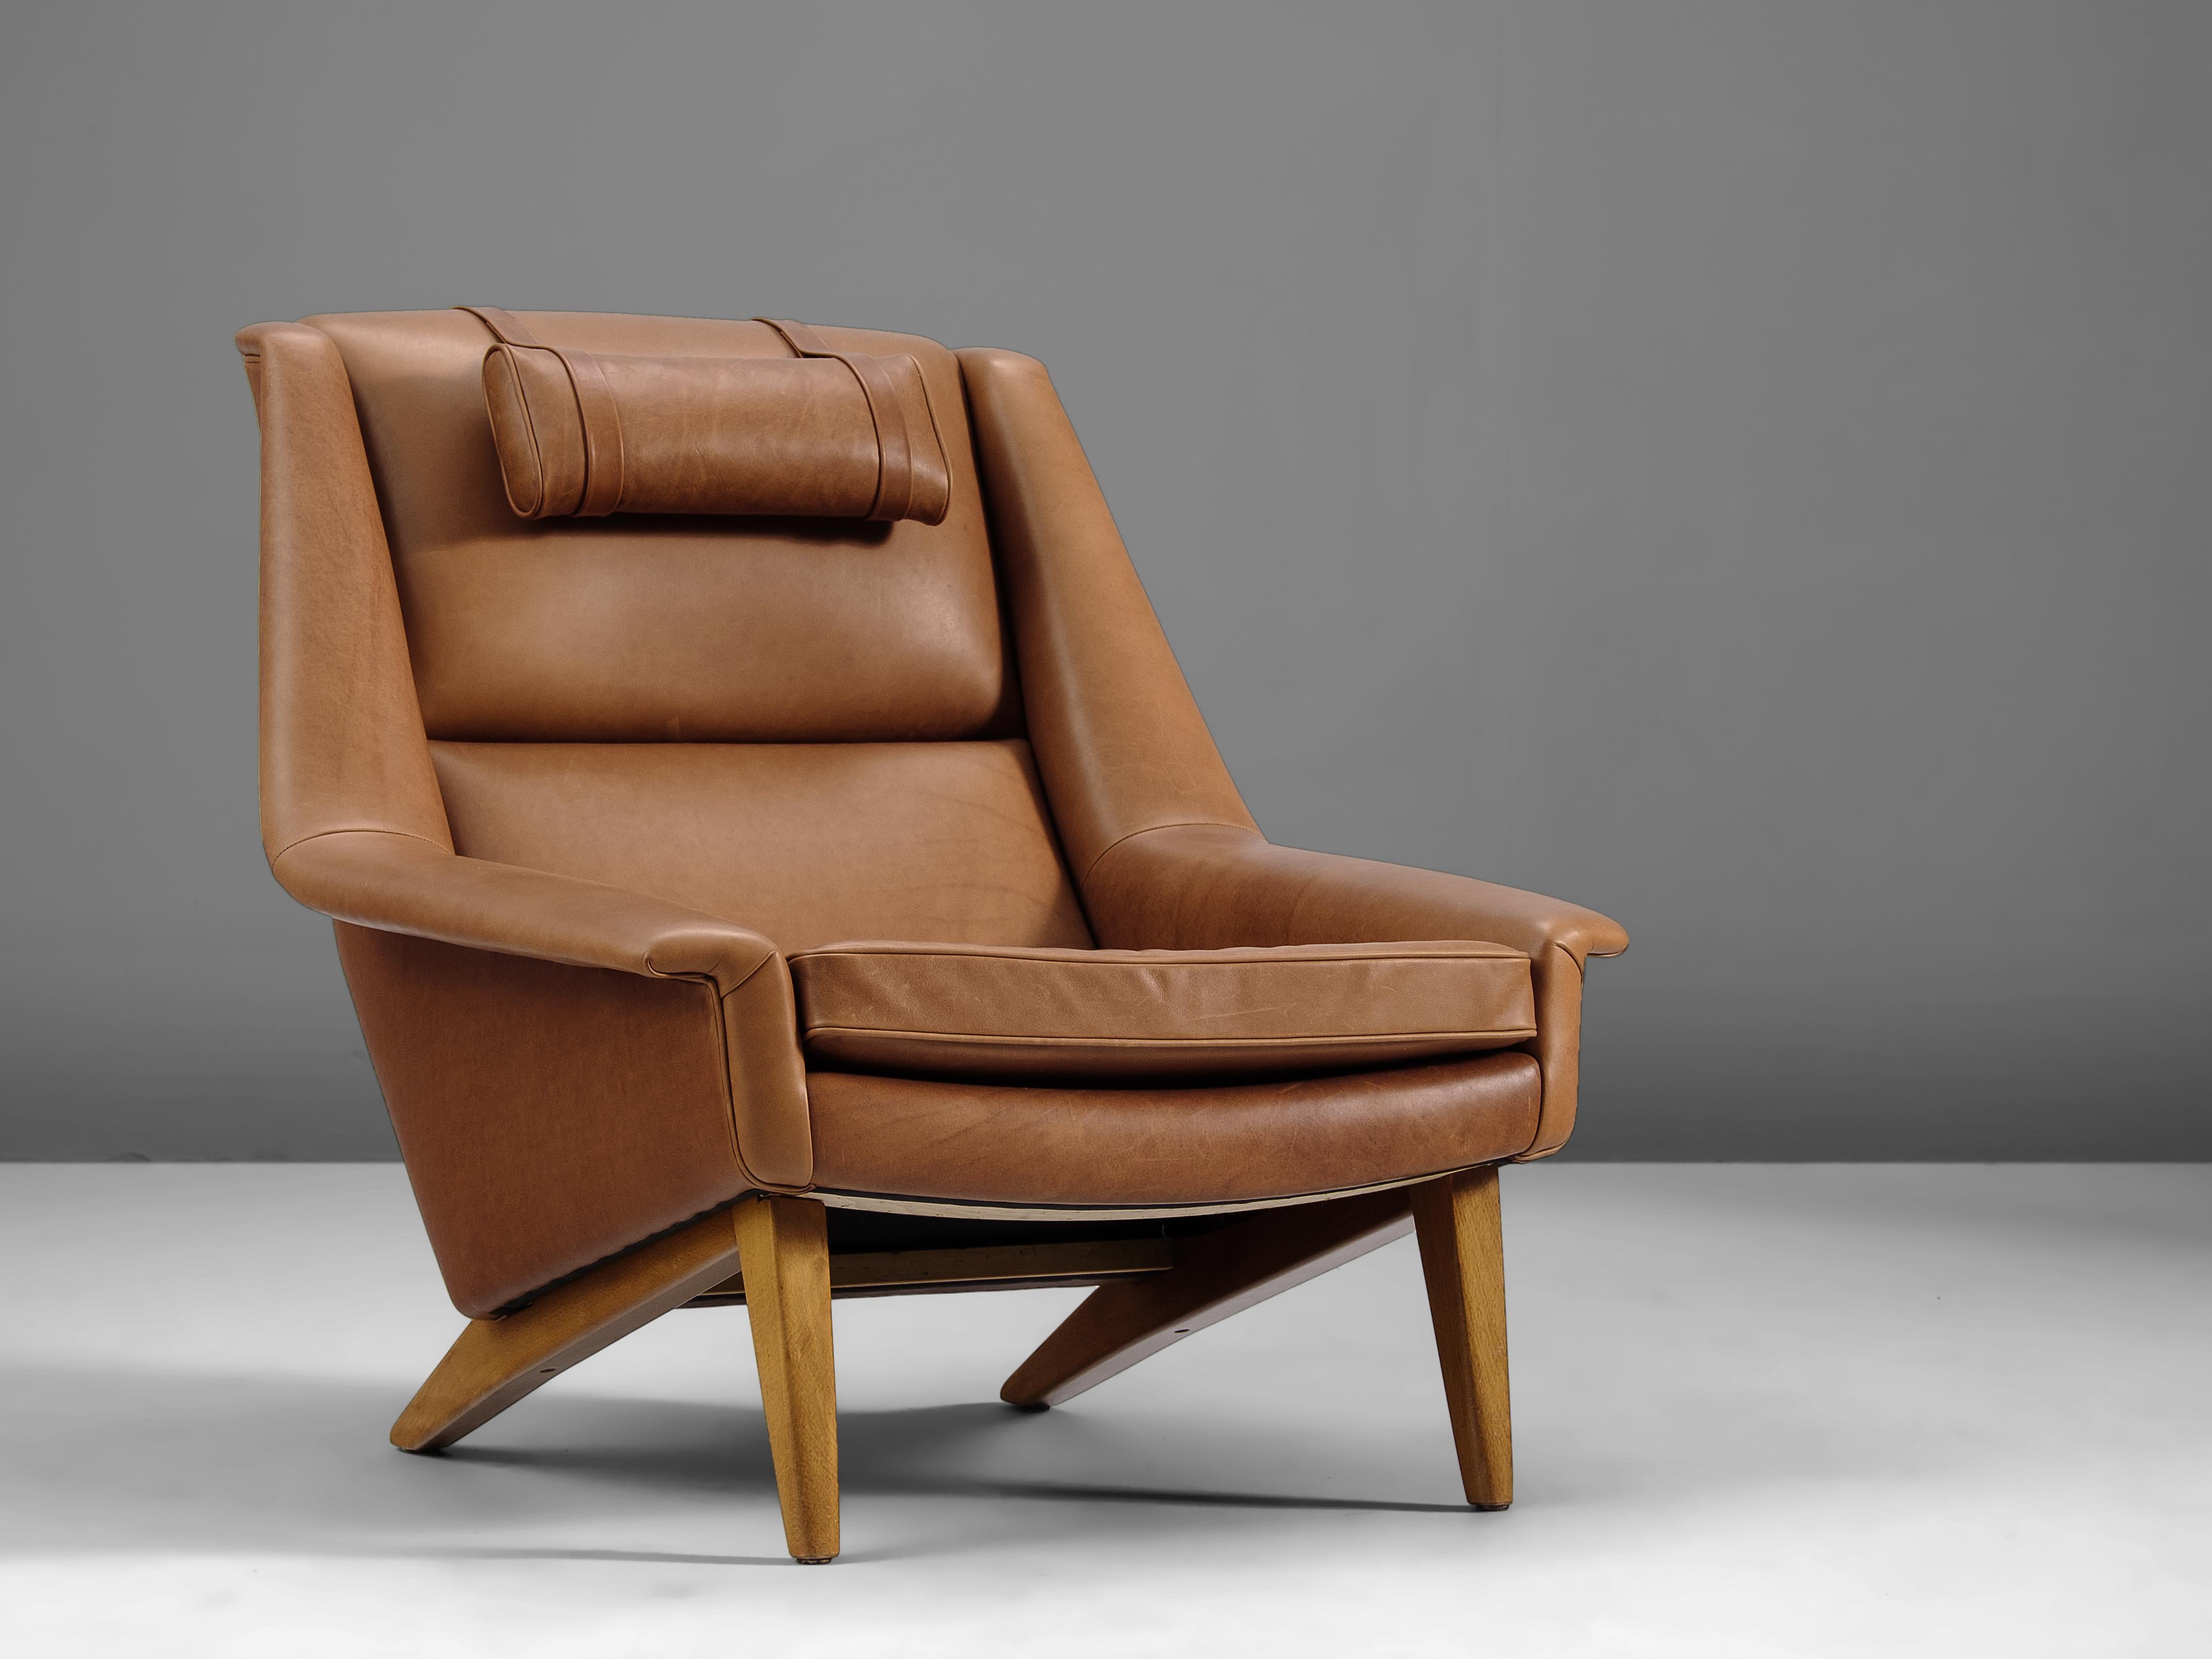 Folke Ohlsson, lounge chair, in any preferred leather of fabric and teak, Denmark, designed in 1957

This high quality made lounge chair is made to reach an ultimate level of comfort as can clearly be recognized in the design. Accompanied with